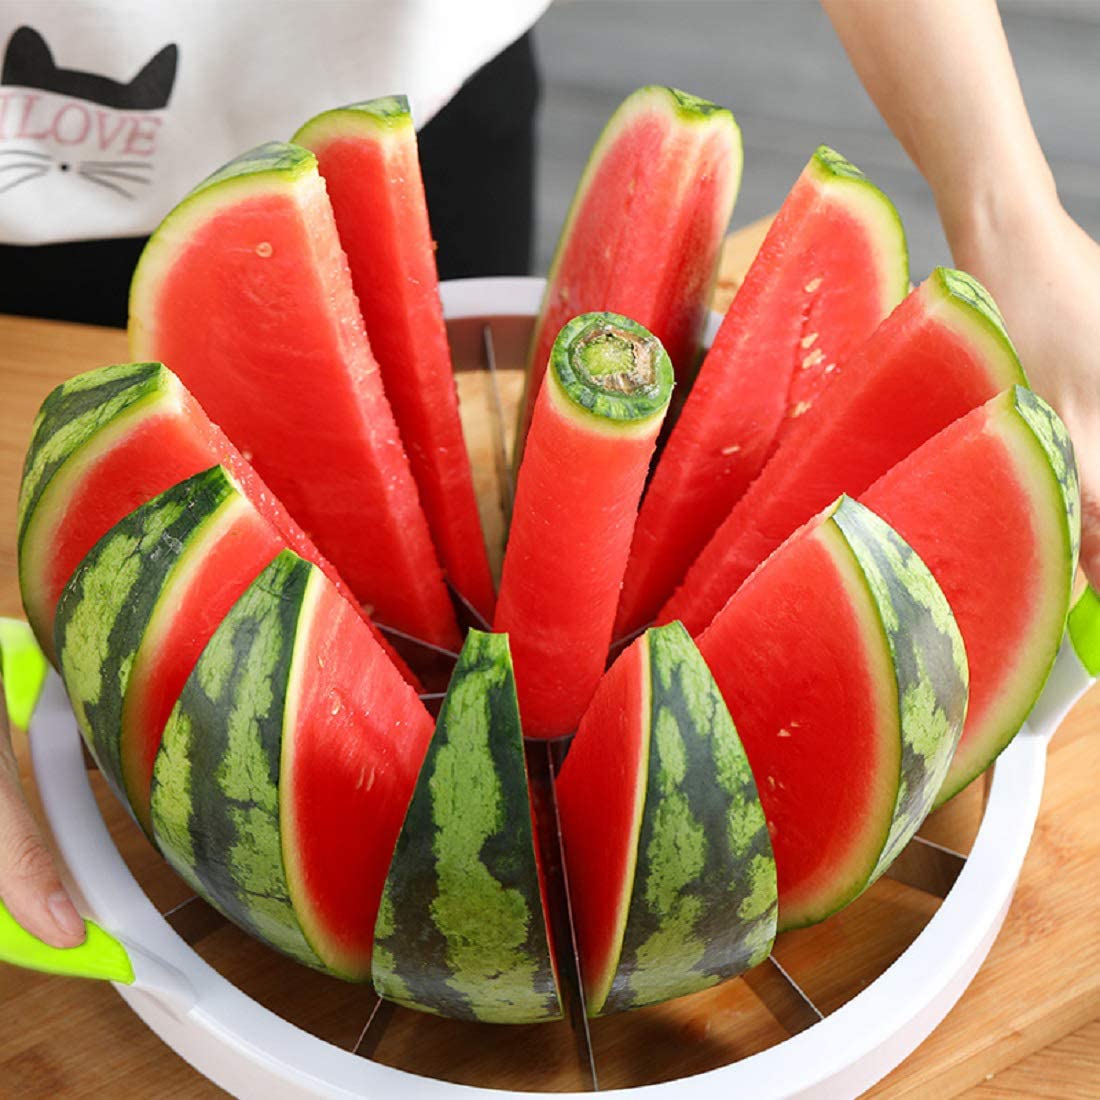 Extra Large Watermelon Slicer Cutter Comfort Silicone Handle,Home Stainless Steel Round Fruit Vegetable Slicer Cutter Peeler Corer Server for Cantaloup Melon,Pineapple,Honeydew,Get 12,As Seen On TV